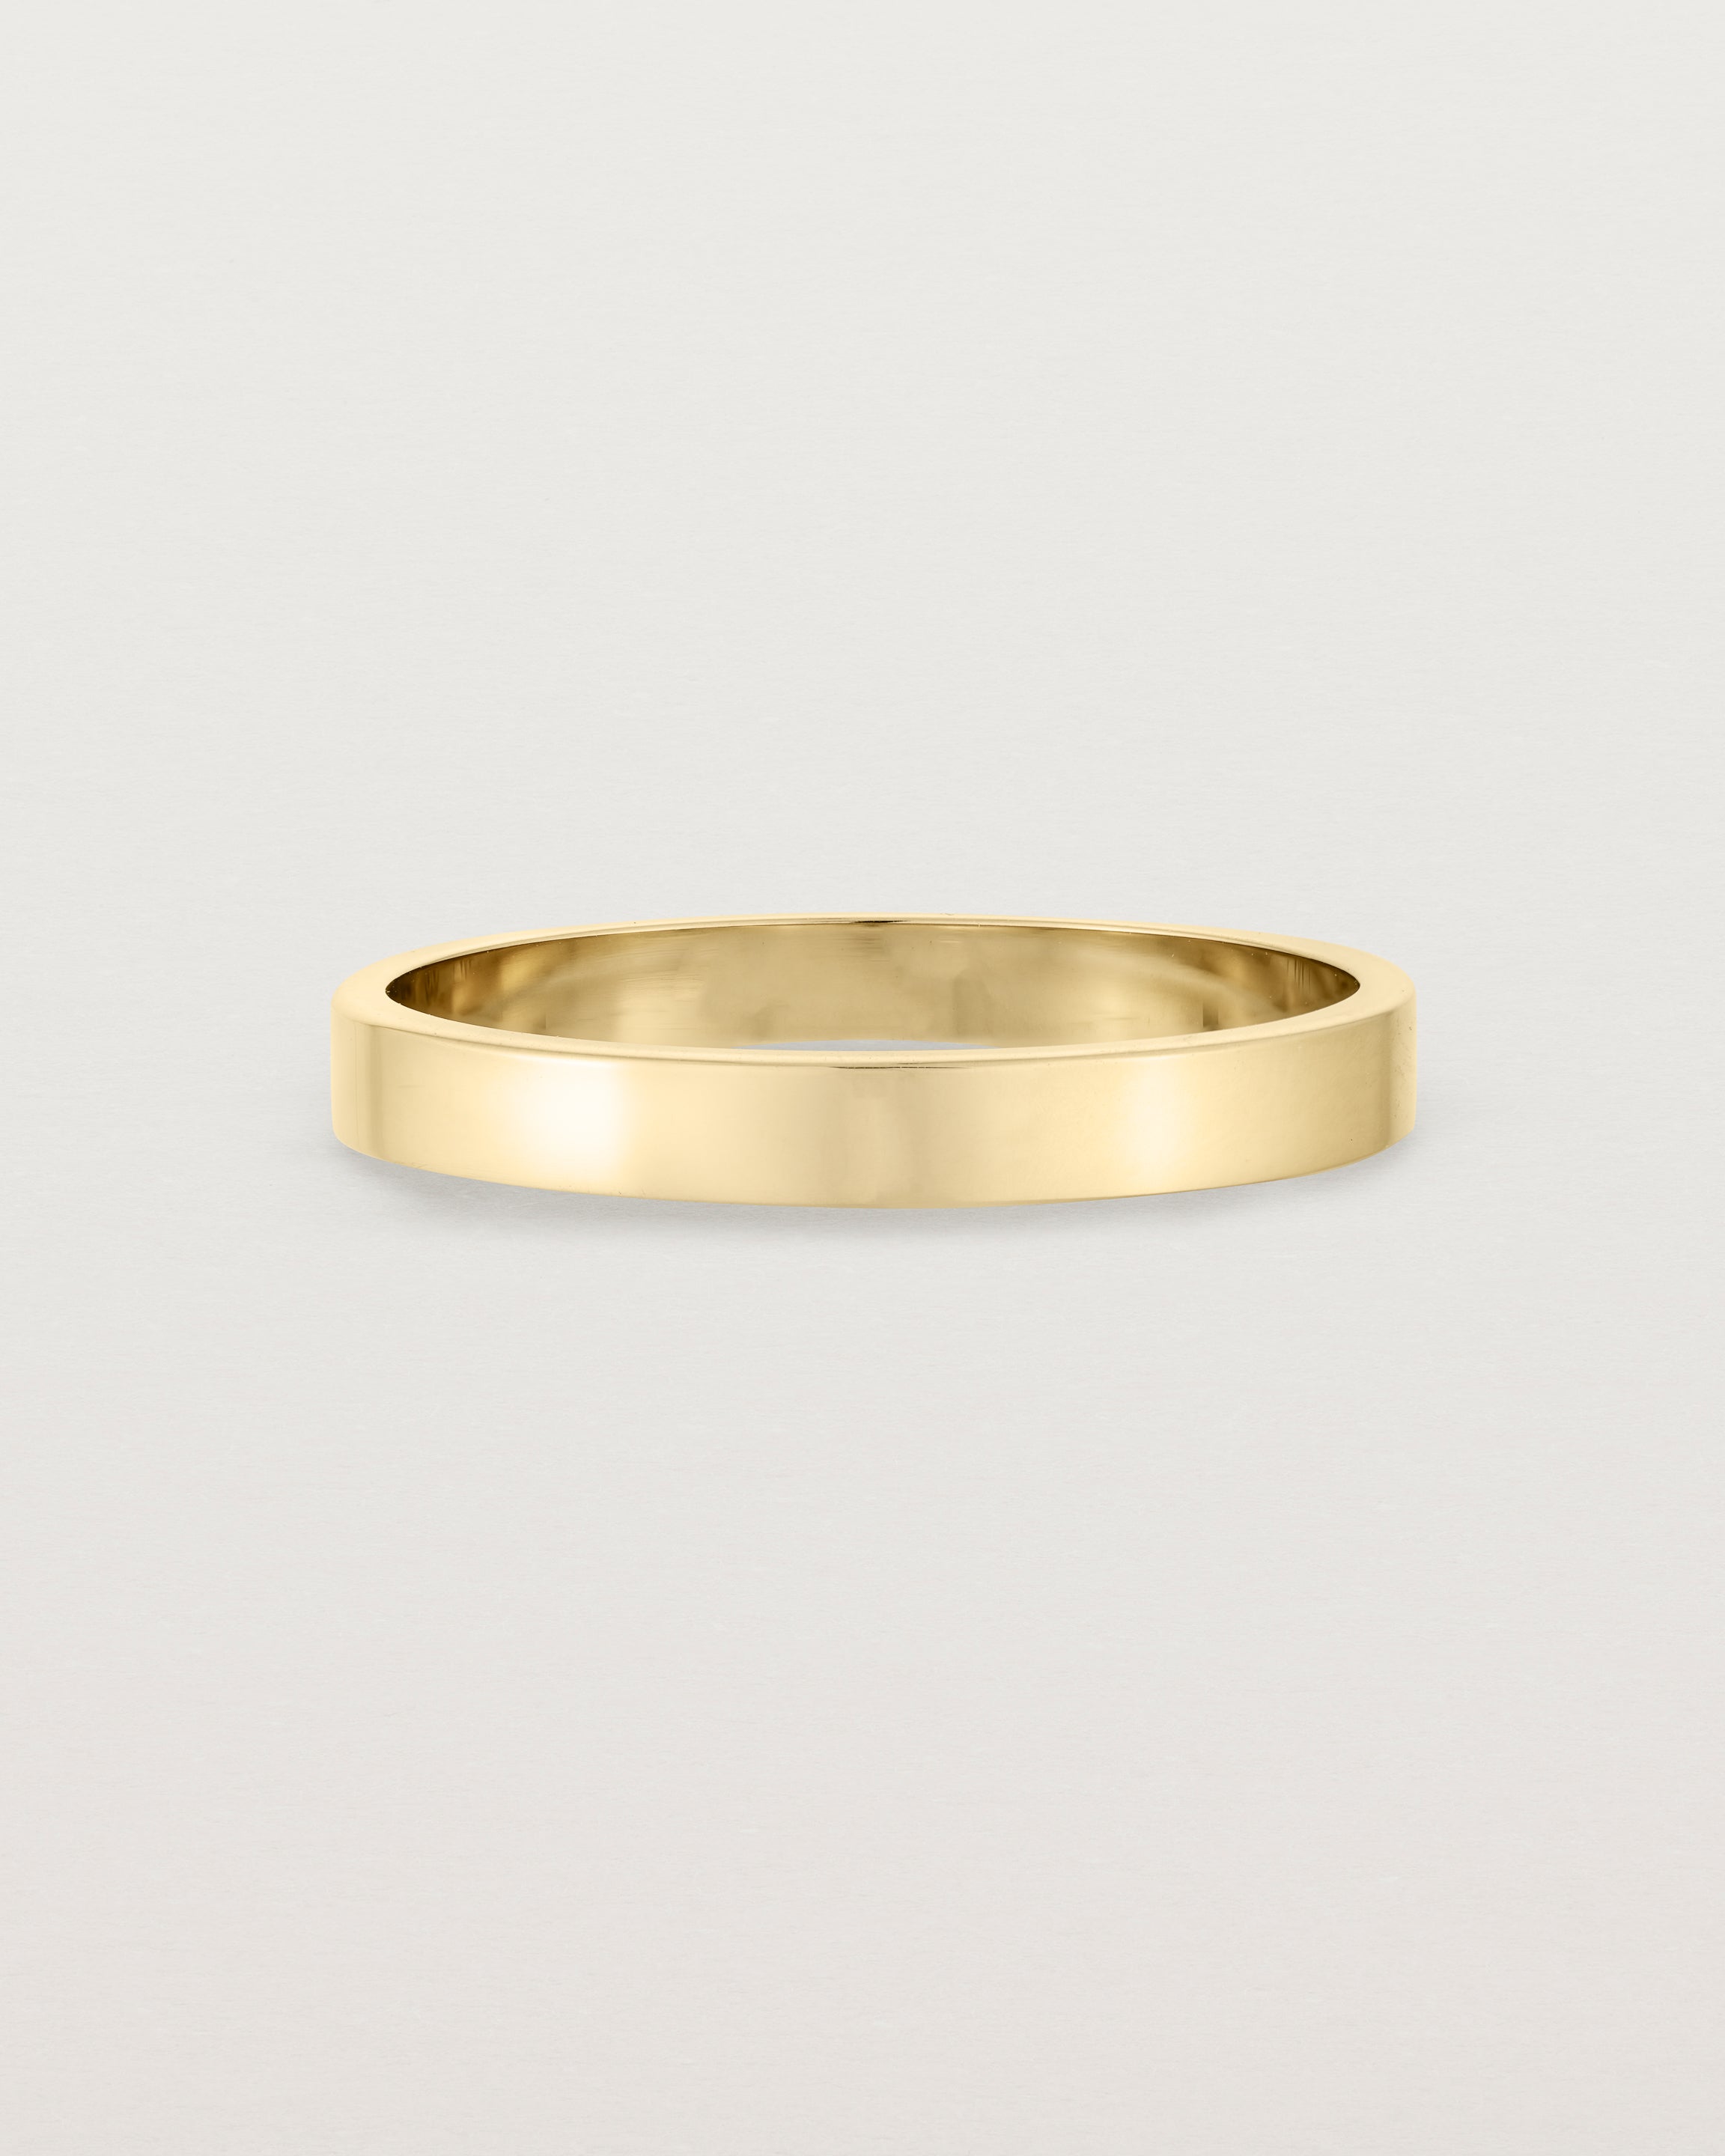 Our square, flat 3mm profile wedding band crafted in yellow gold